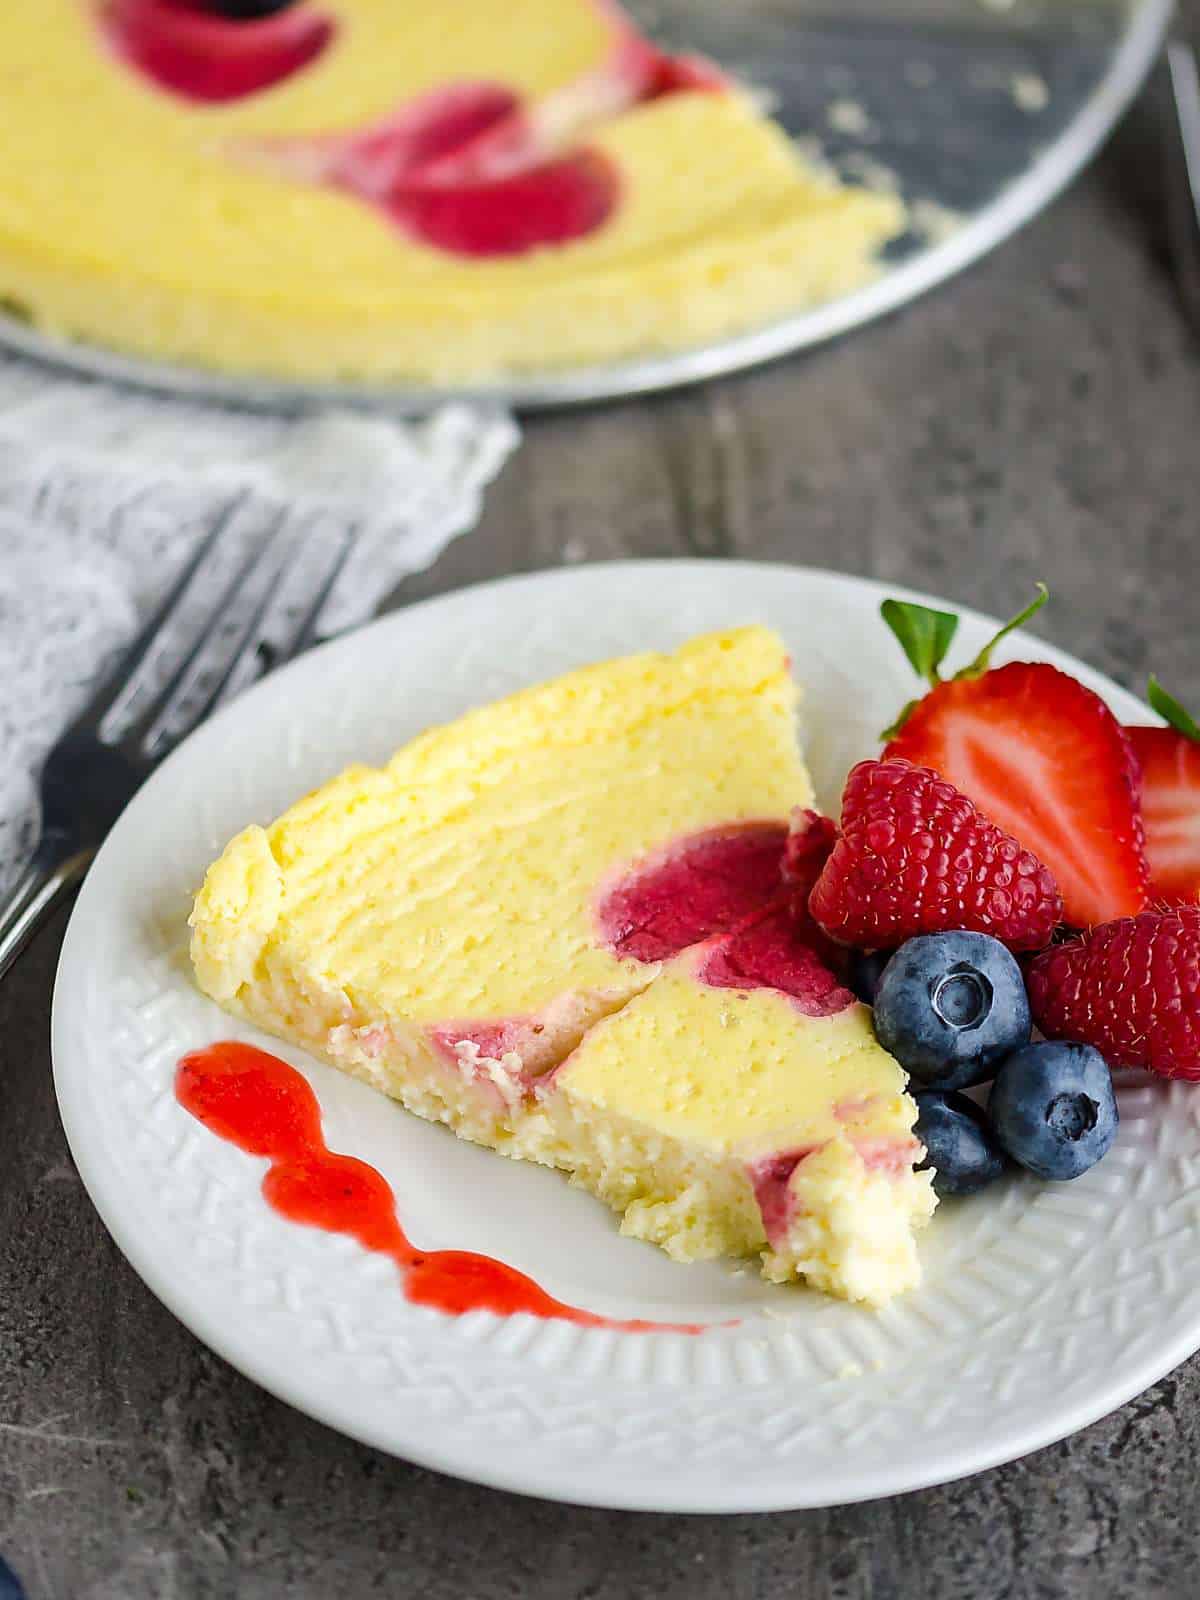 slice of 'lighter' cheesecake on a plate garnished with fresh strawberries, blueberries, and raspberries, drizzles with strawberry sauce. 